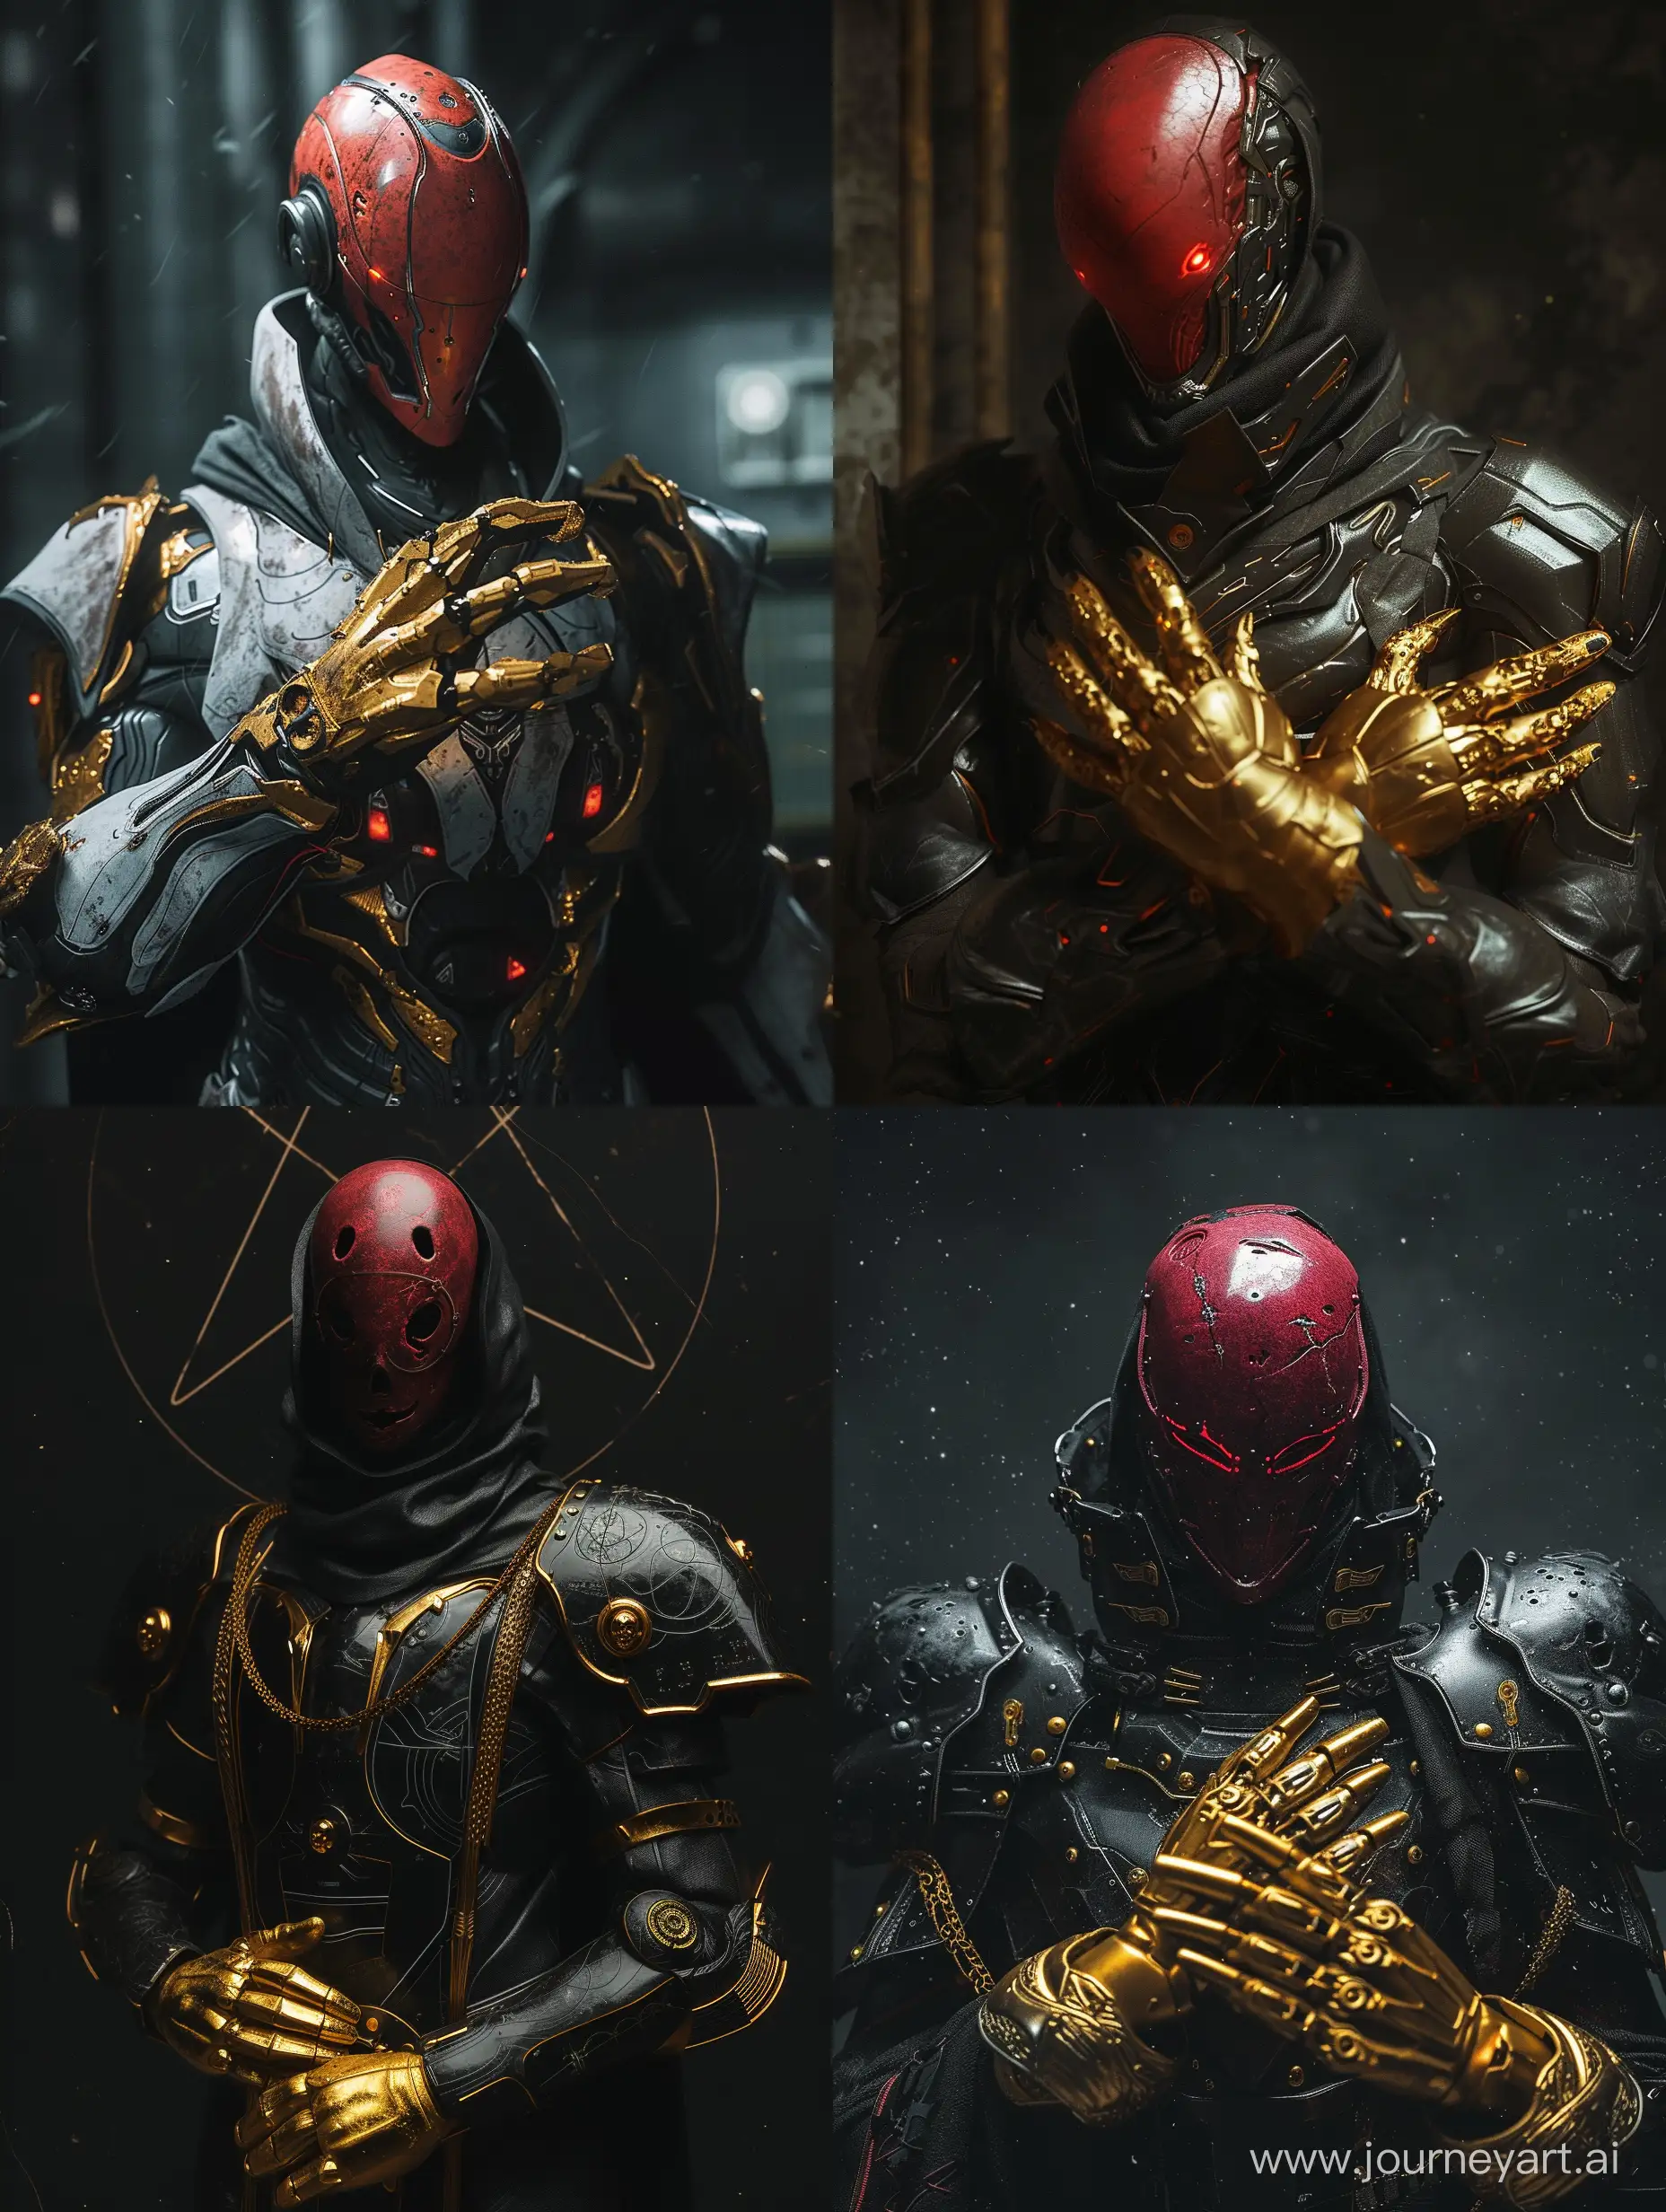 Epic-SciFi-Divinity-Masterful-Lighting-Composition-Featuring-a-Male-Character-in-Dark-Souls-Inspired-Armor-and-SCP-Red-Mask-with-Gold-Gloves